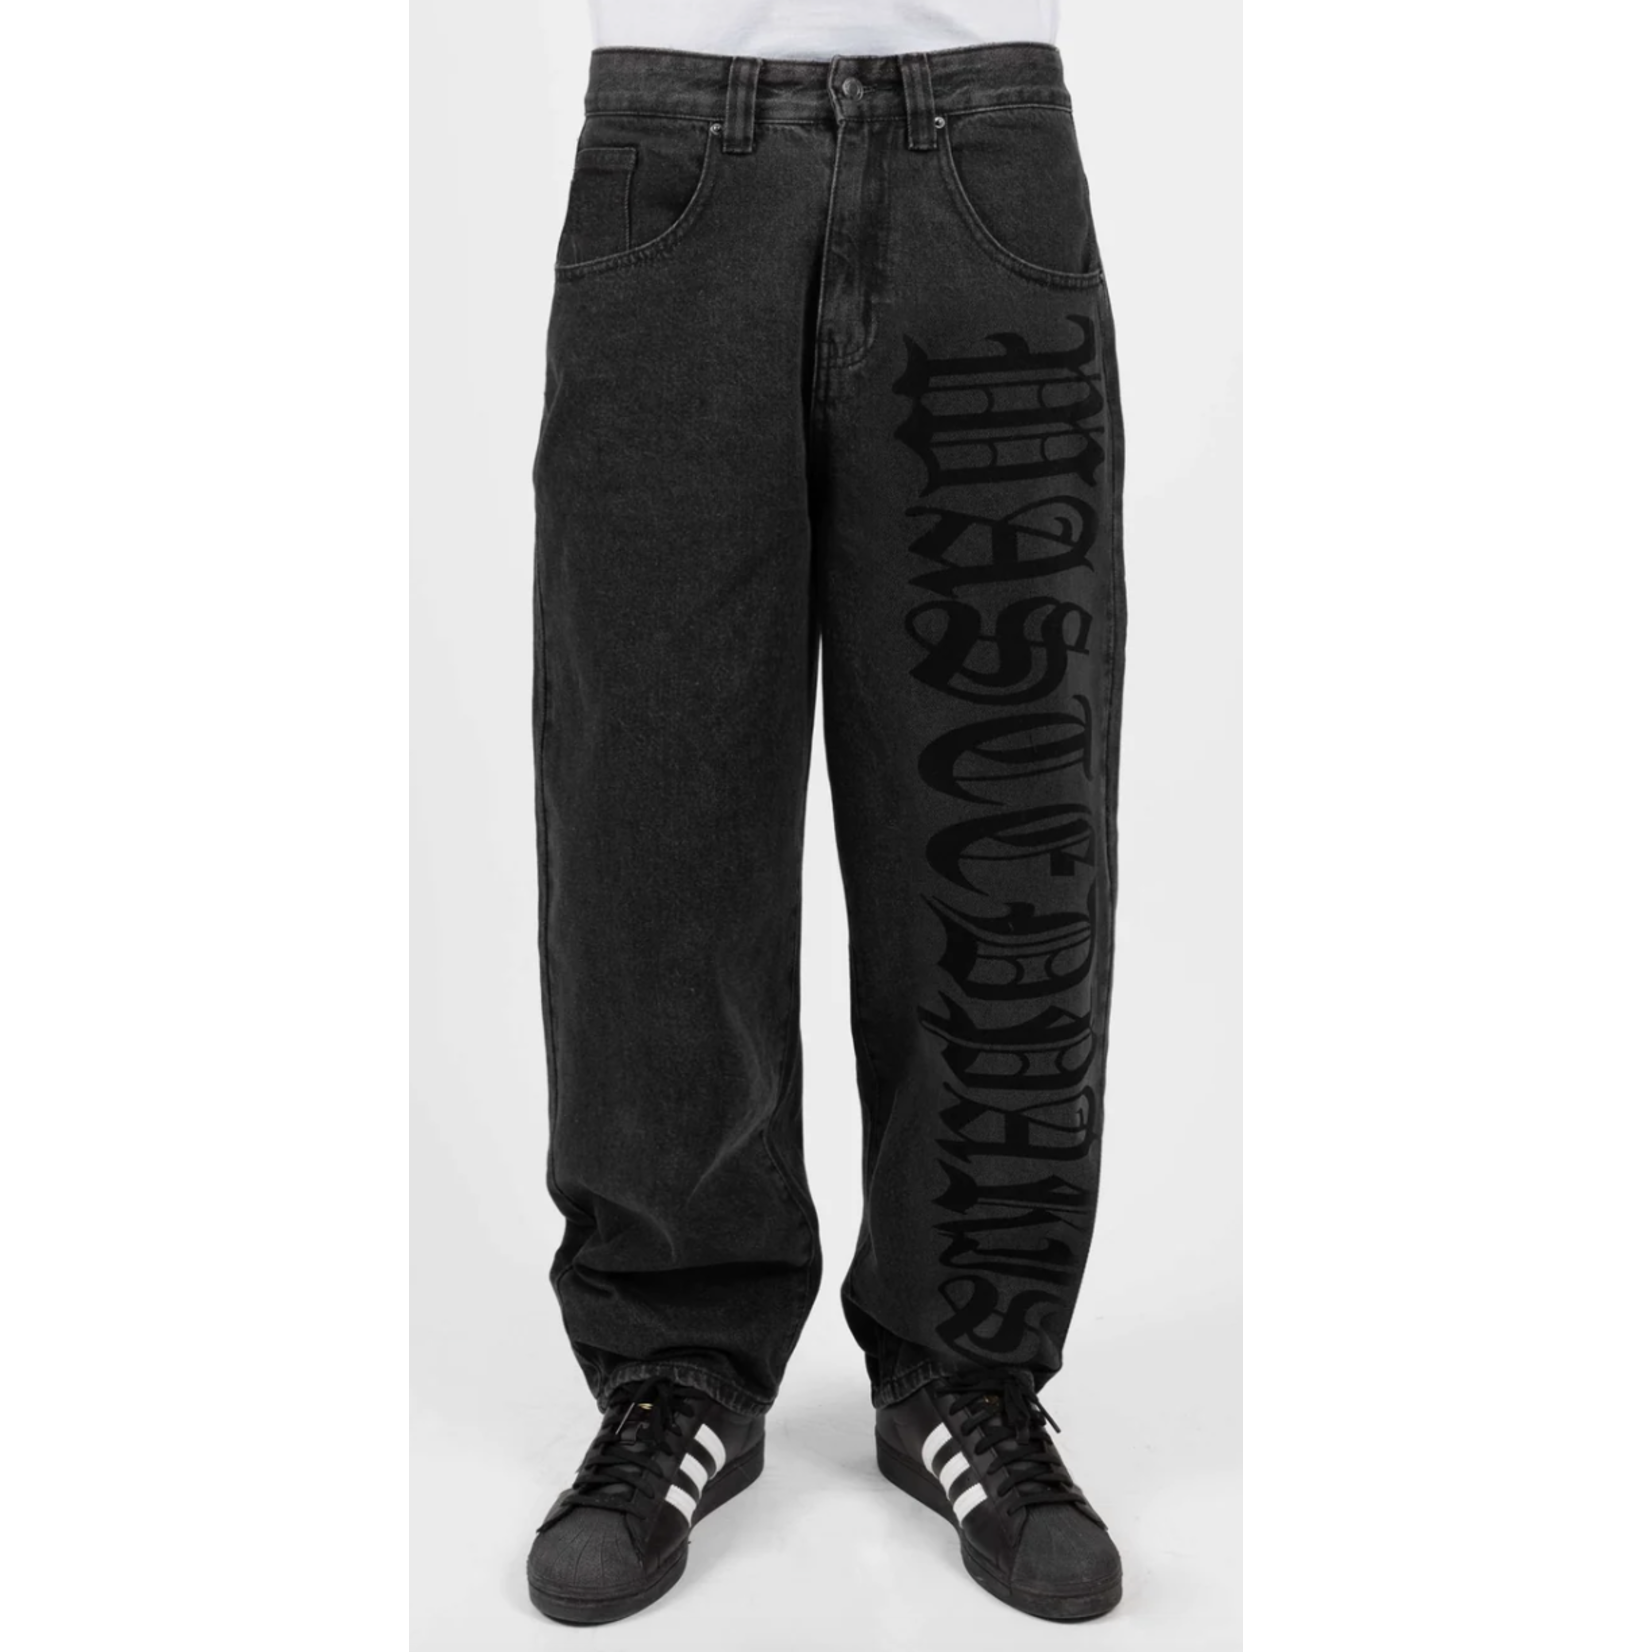 WASTED PARIS Wasted Paris Casper Pant Faithful - Faded Grey